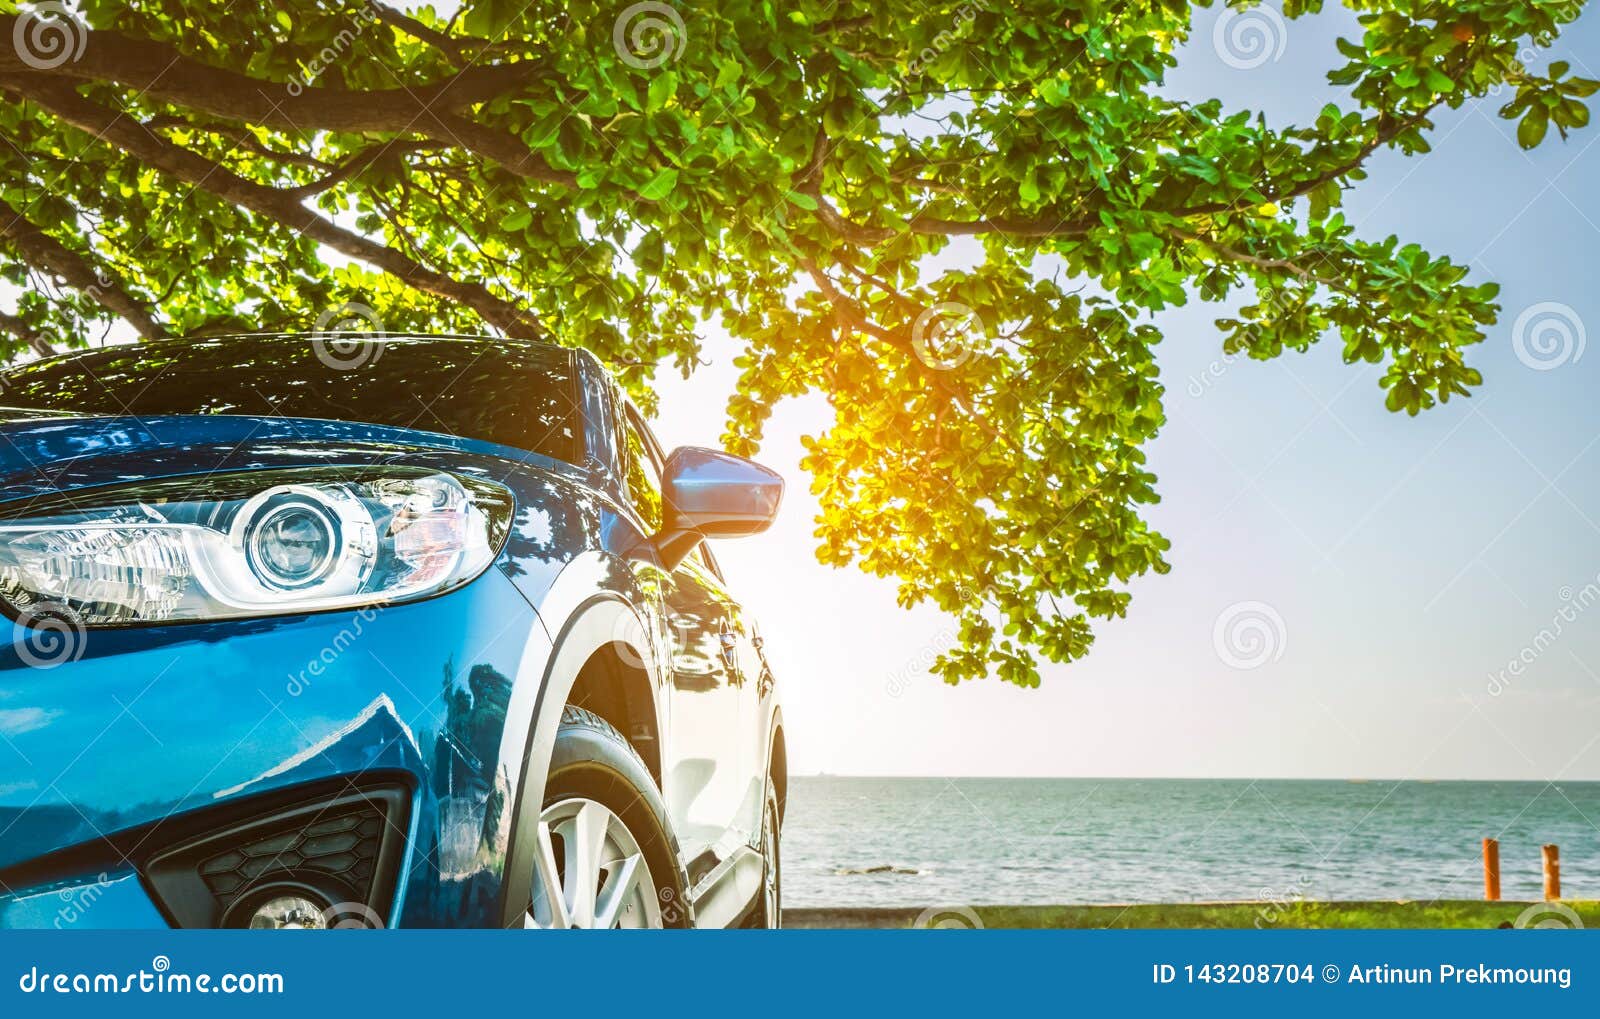 blue sport suv car parked by the tropical sea under umbrella tree. summer vacation at the beach. summer travel by car. road trip.